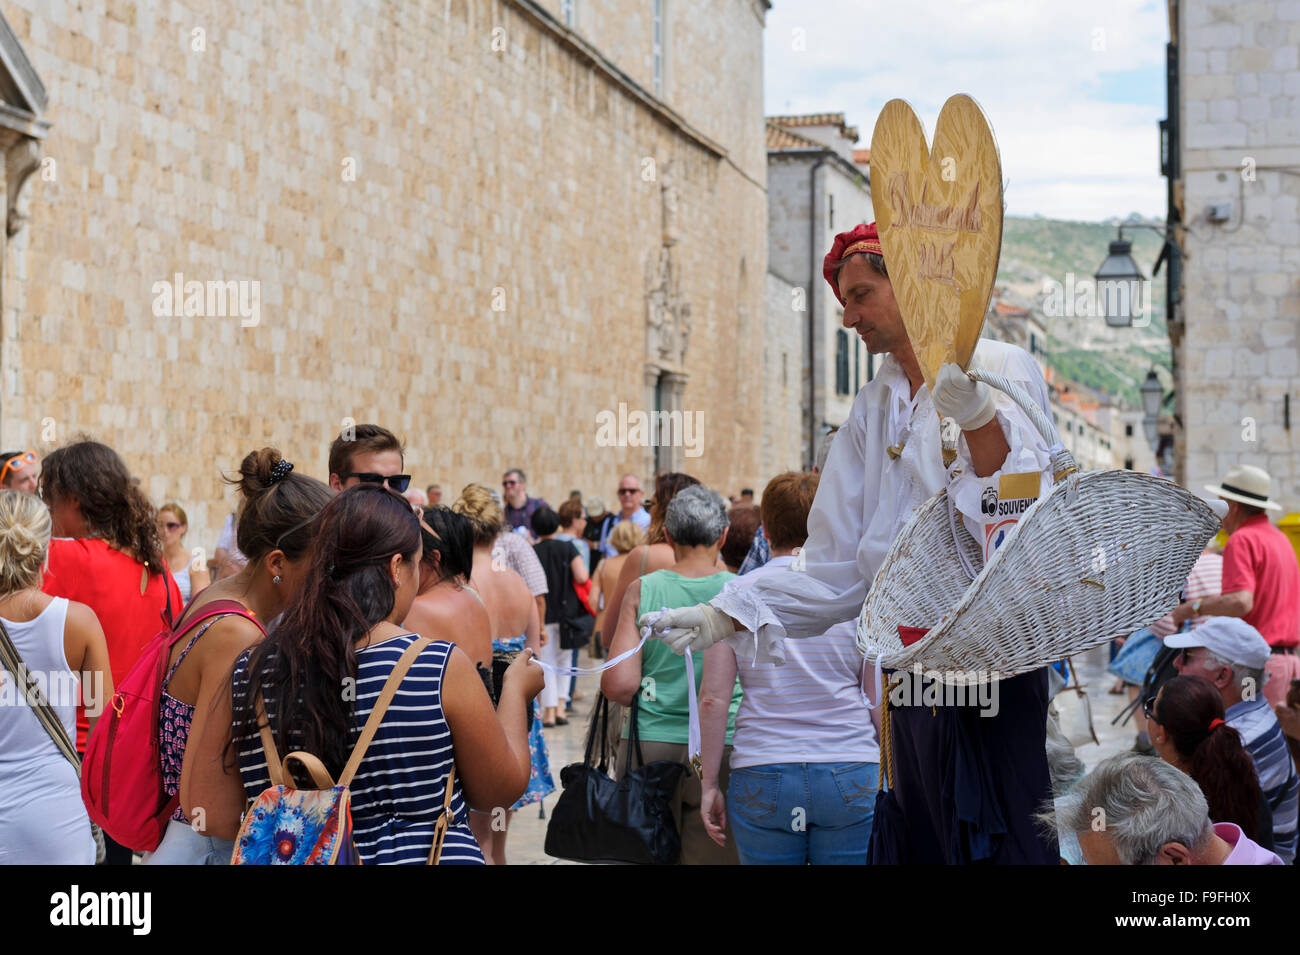 A man holding a heart shape red cardboard and selling necklaces to tourists, Dubrovnik, Croatia. Stock Photo